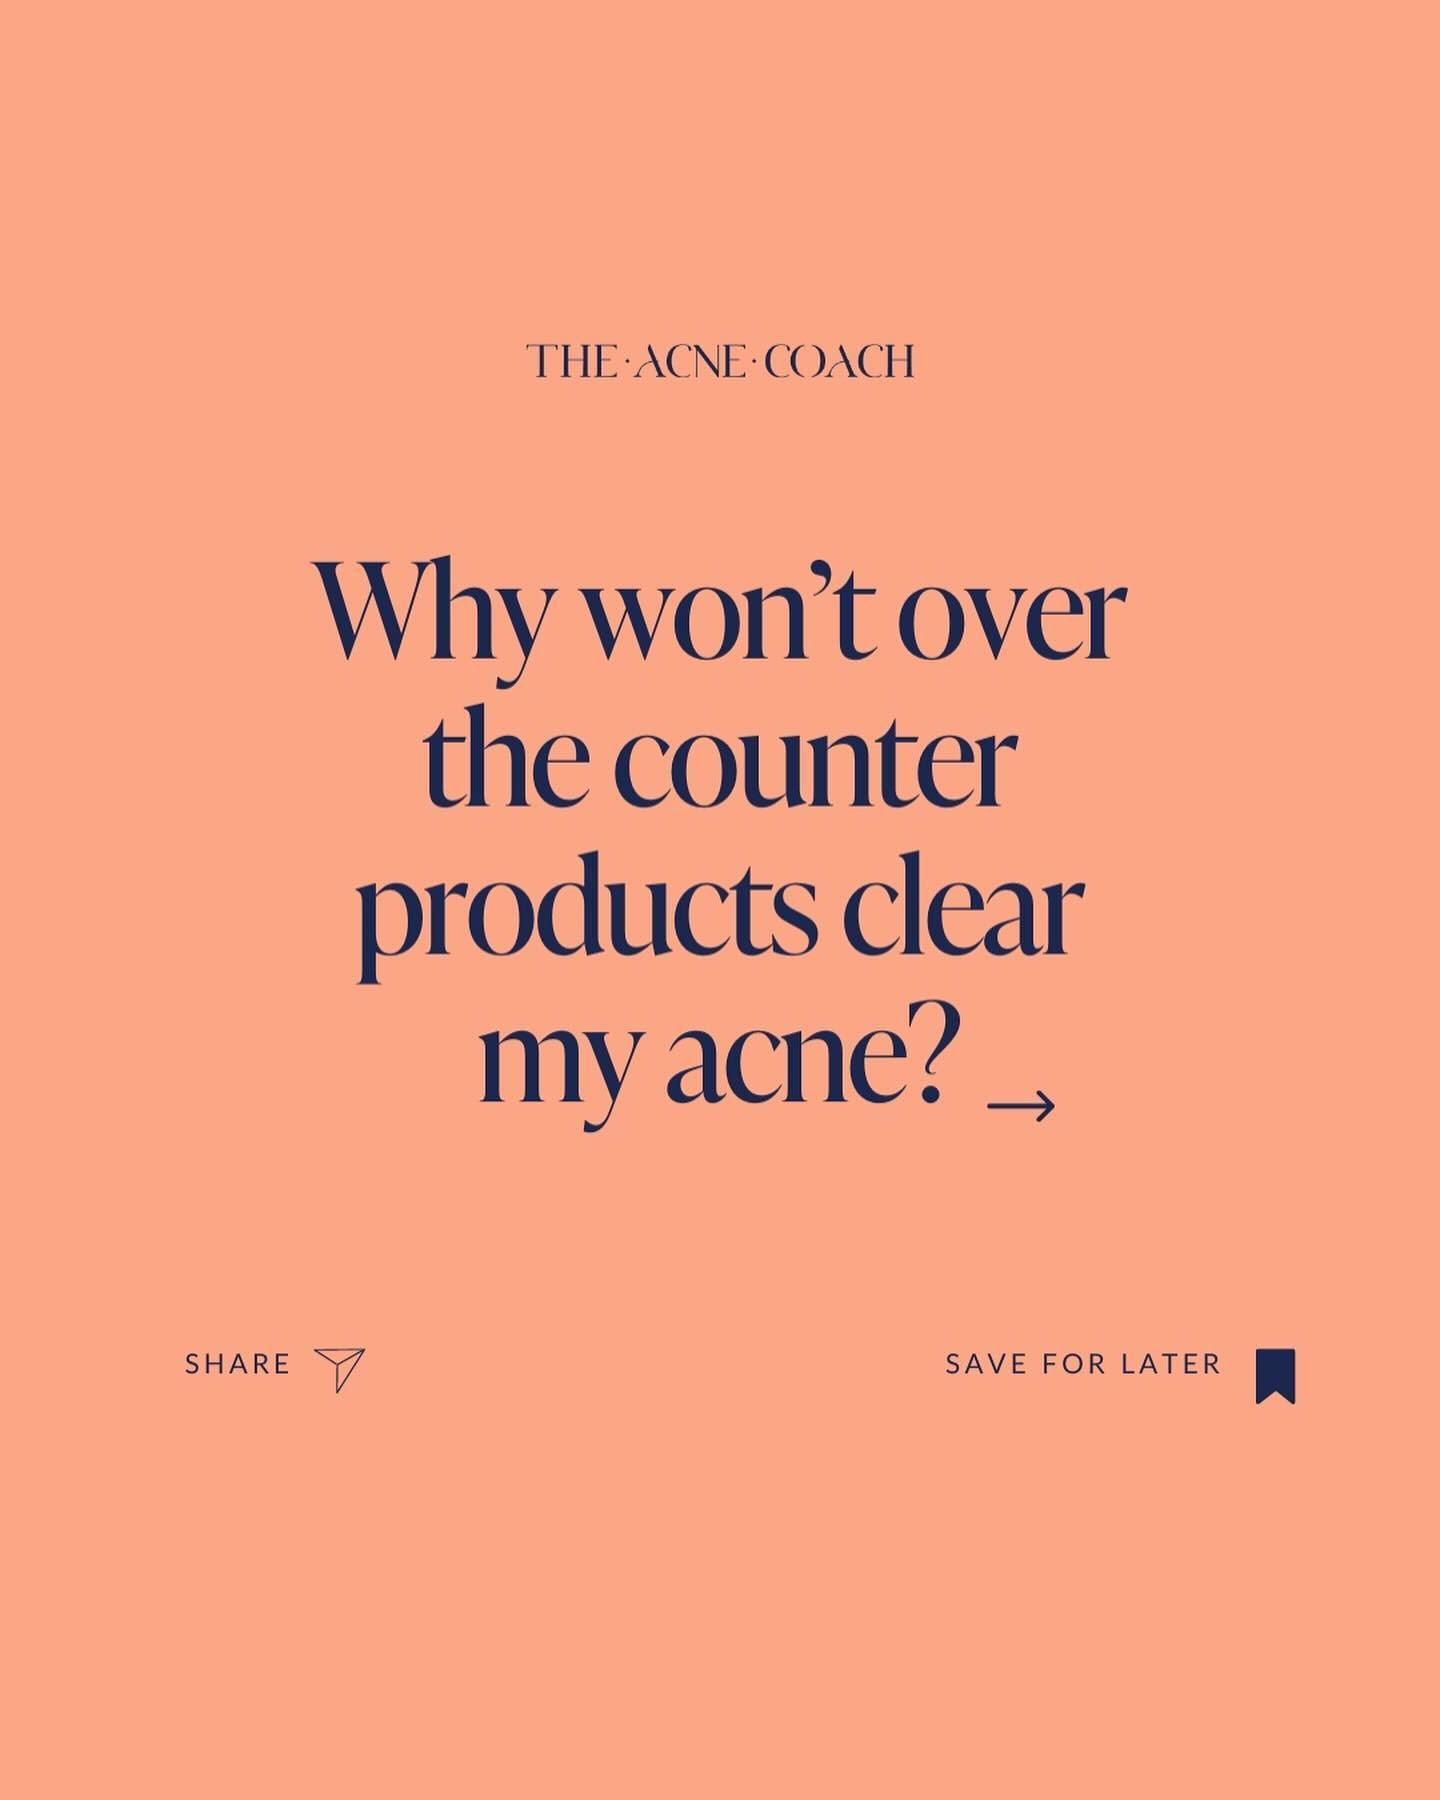 Here&rsquo;s why over the counter (OTC) products won&rsquo;t work for acne 👇

#1 95% of skincare products contain pore clogging ingredients, which is the number one contributor to acne. It&rsquo;s almost impossible to find any product that doesn&rsq